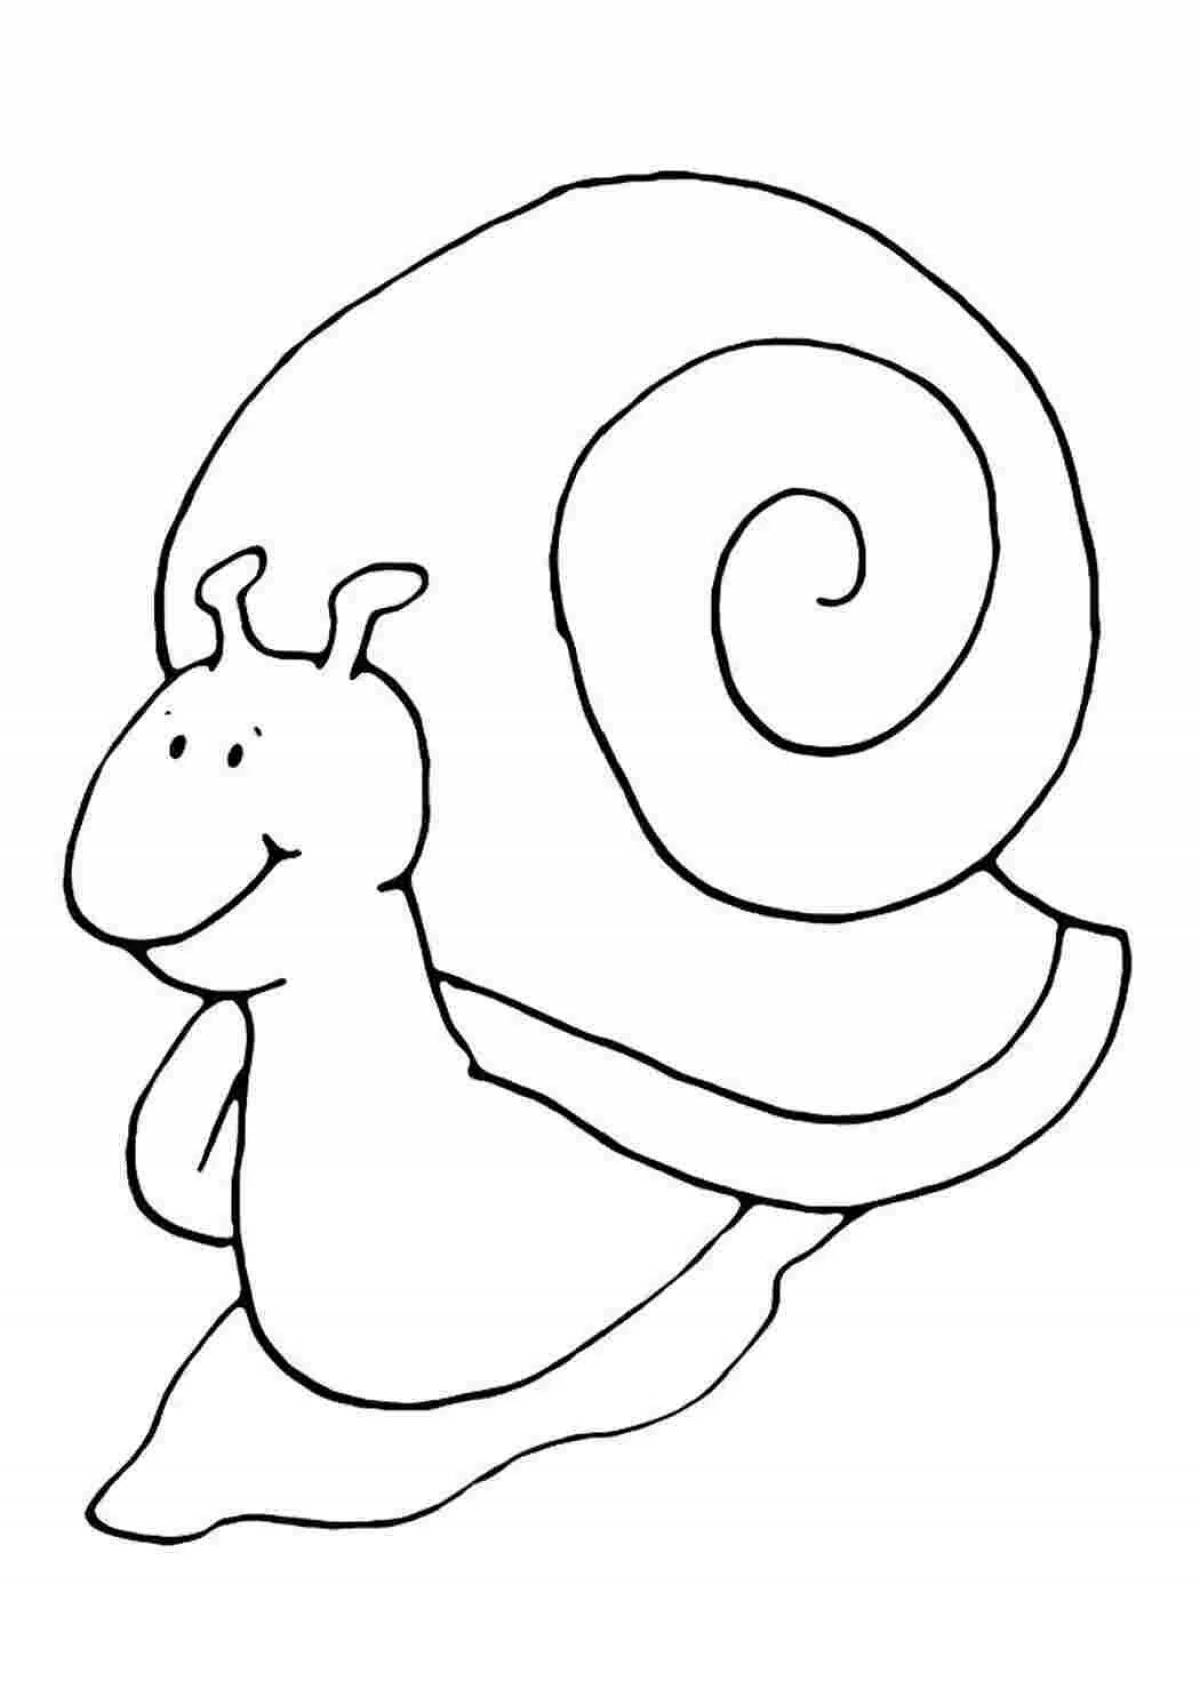 Color live coloring snail for children 3-4 years old